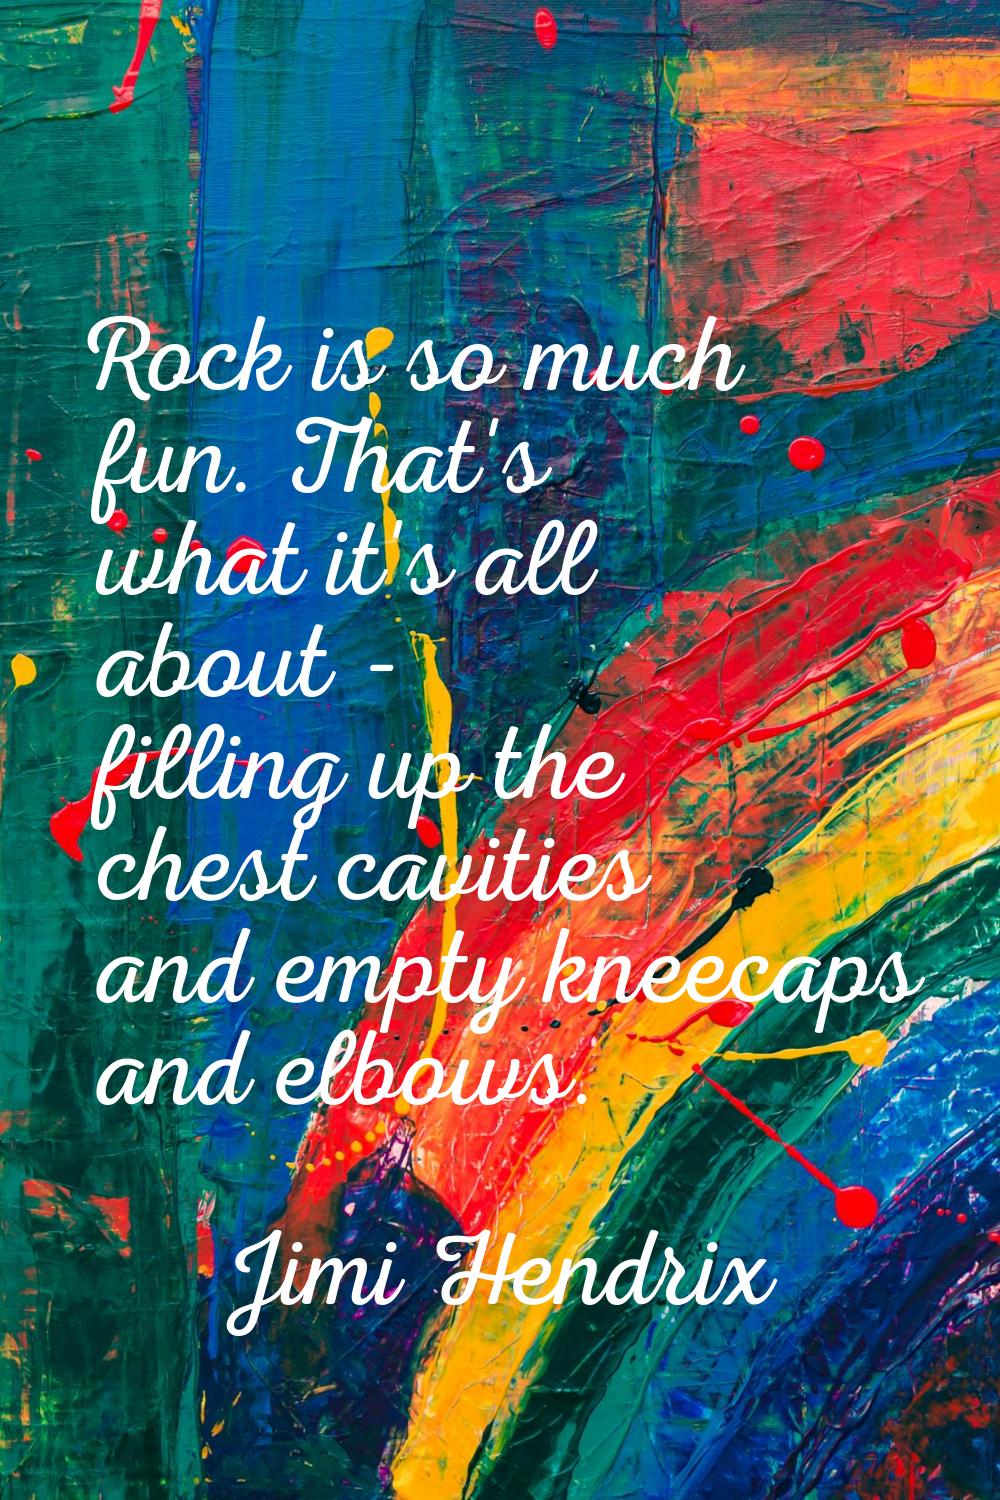 Rock is so much fun. That's what it's all about - filling up the chest cavities and empty kneecaps 